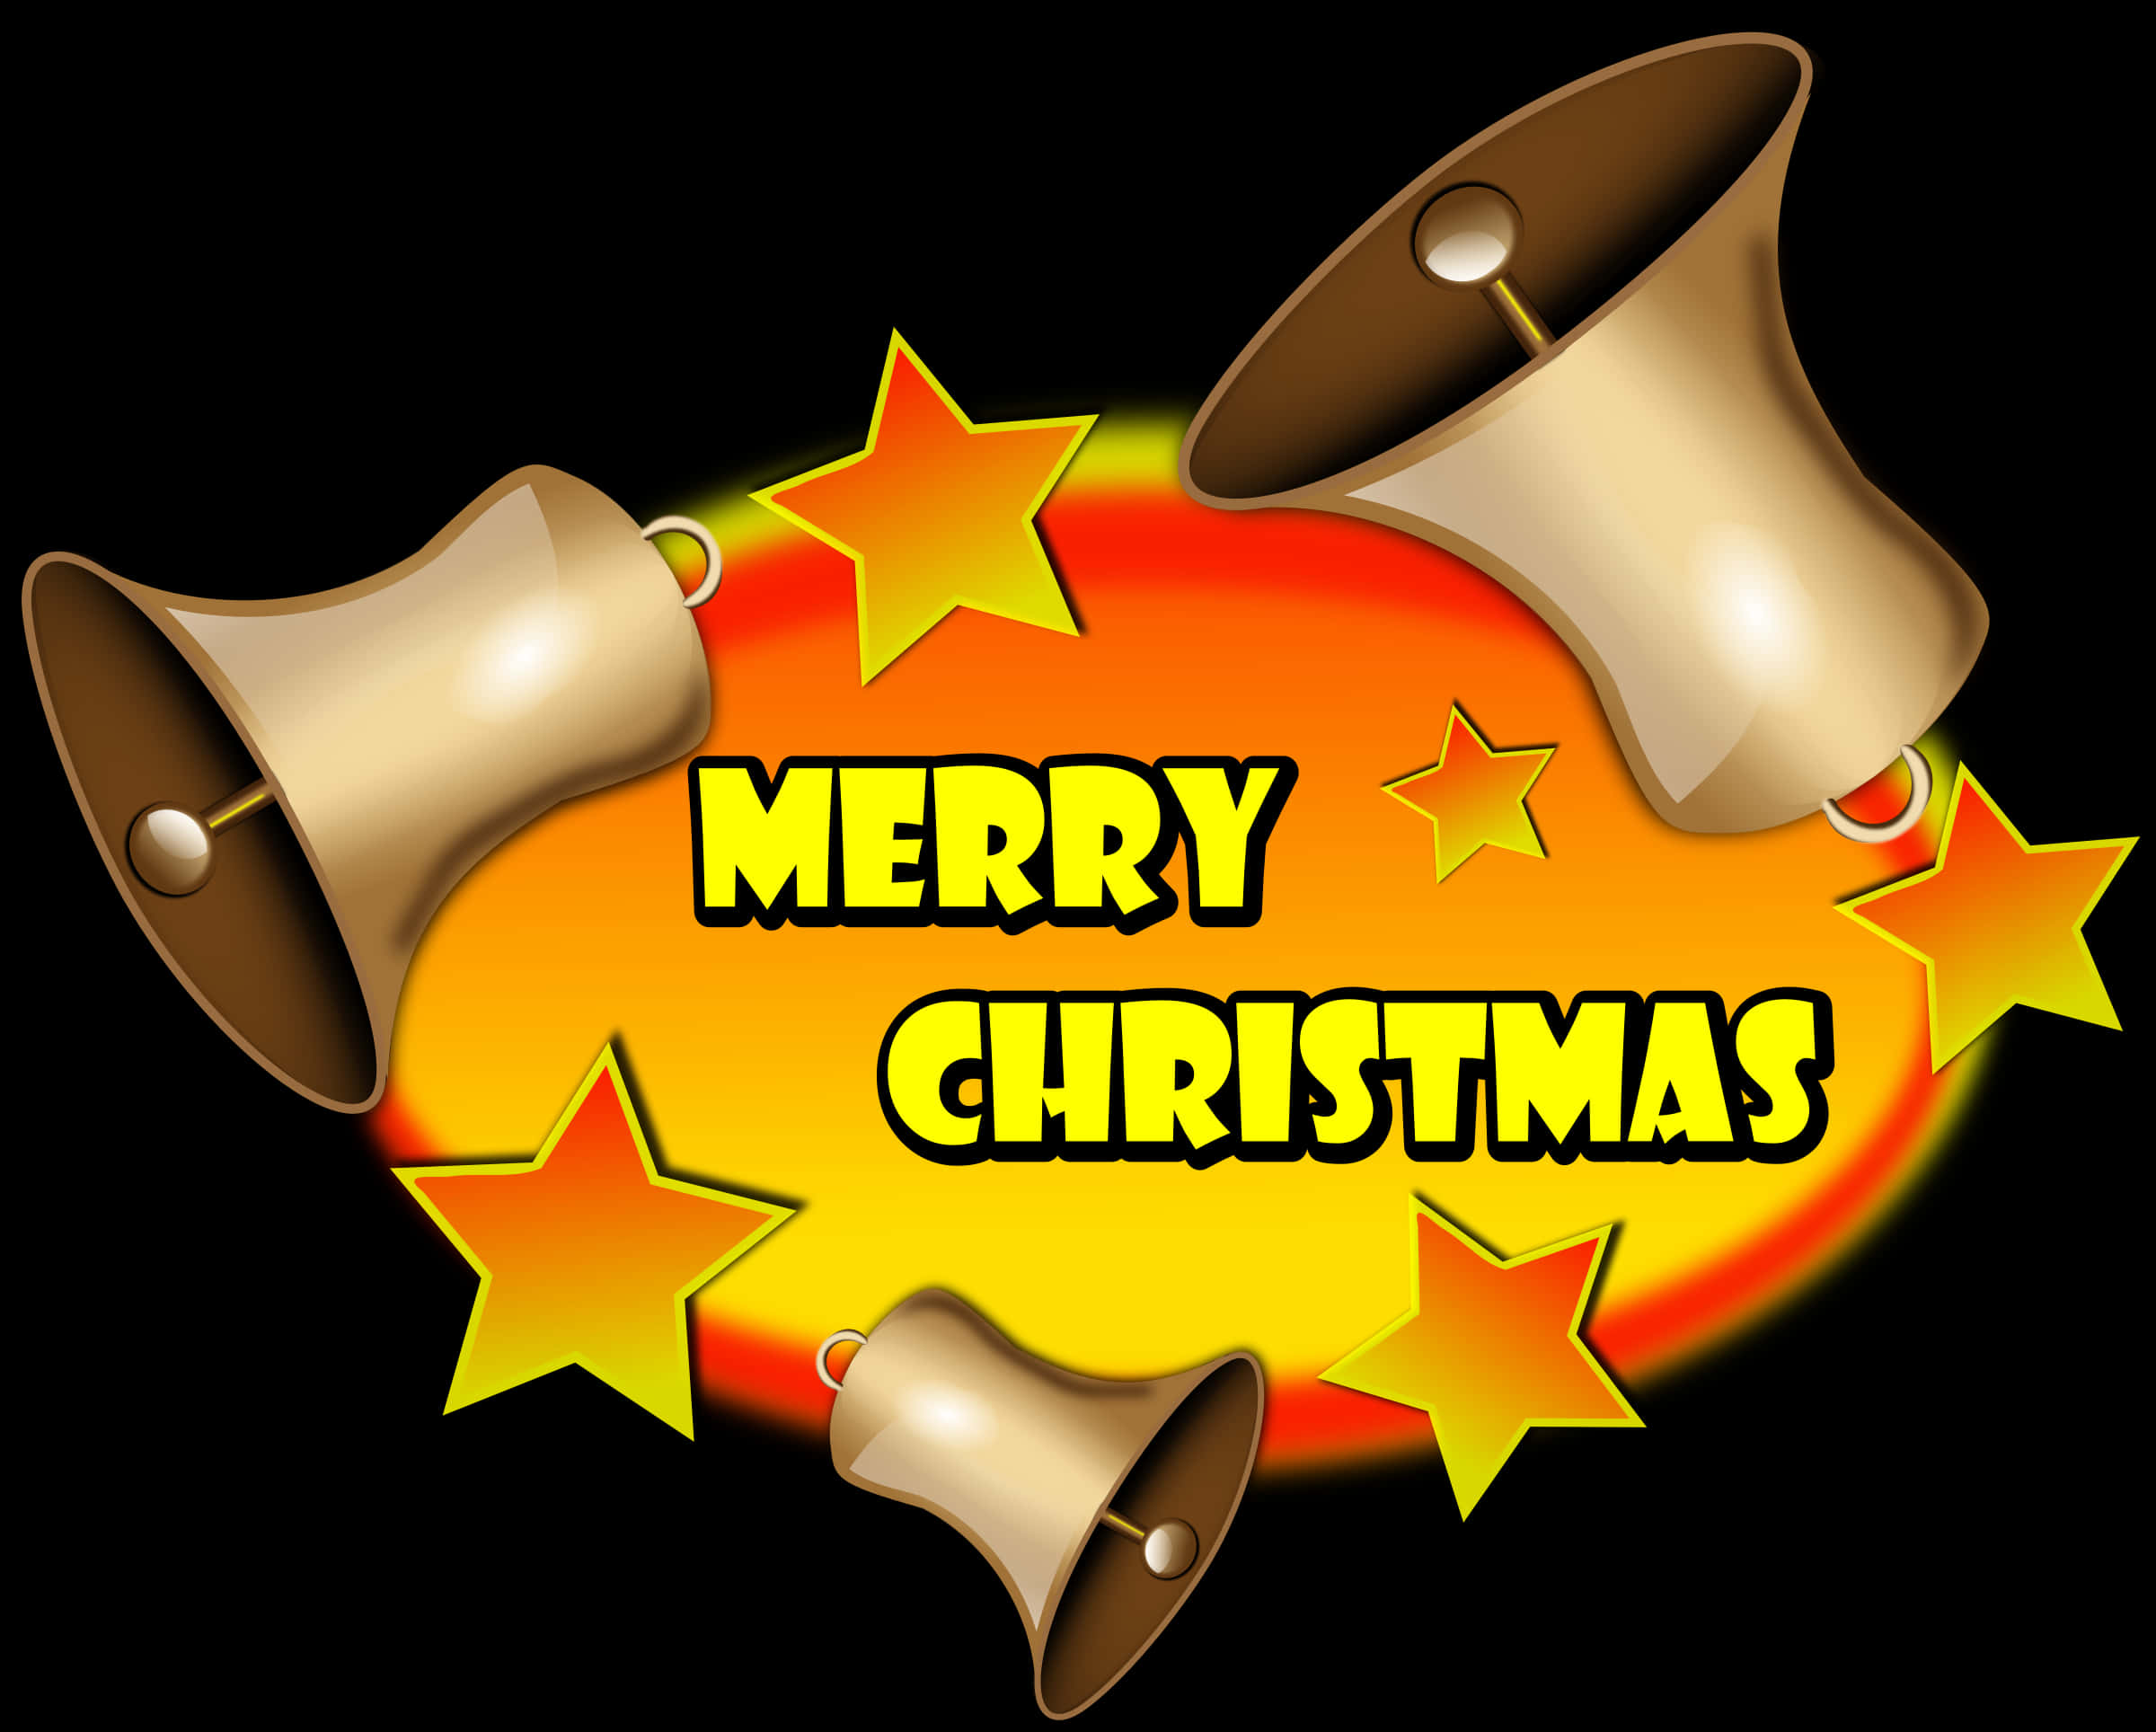 Merry Christmas Bells Graphic PNG image